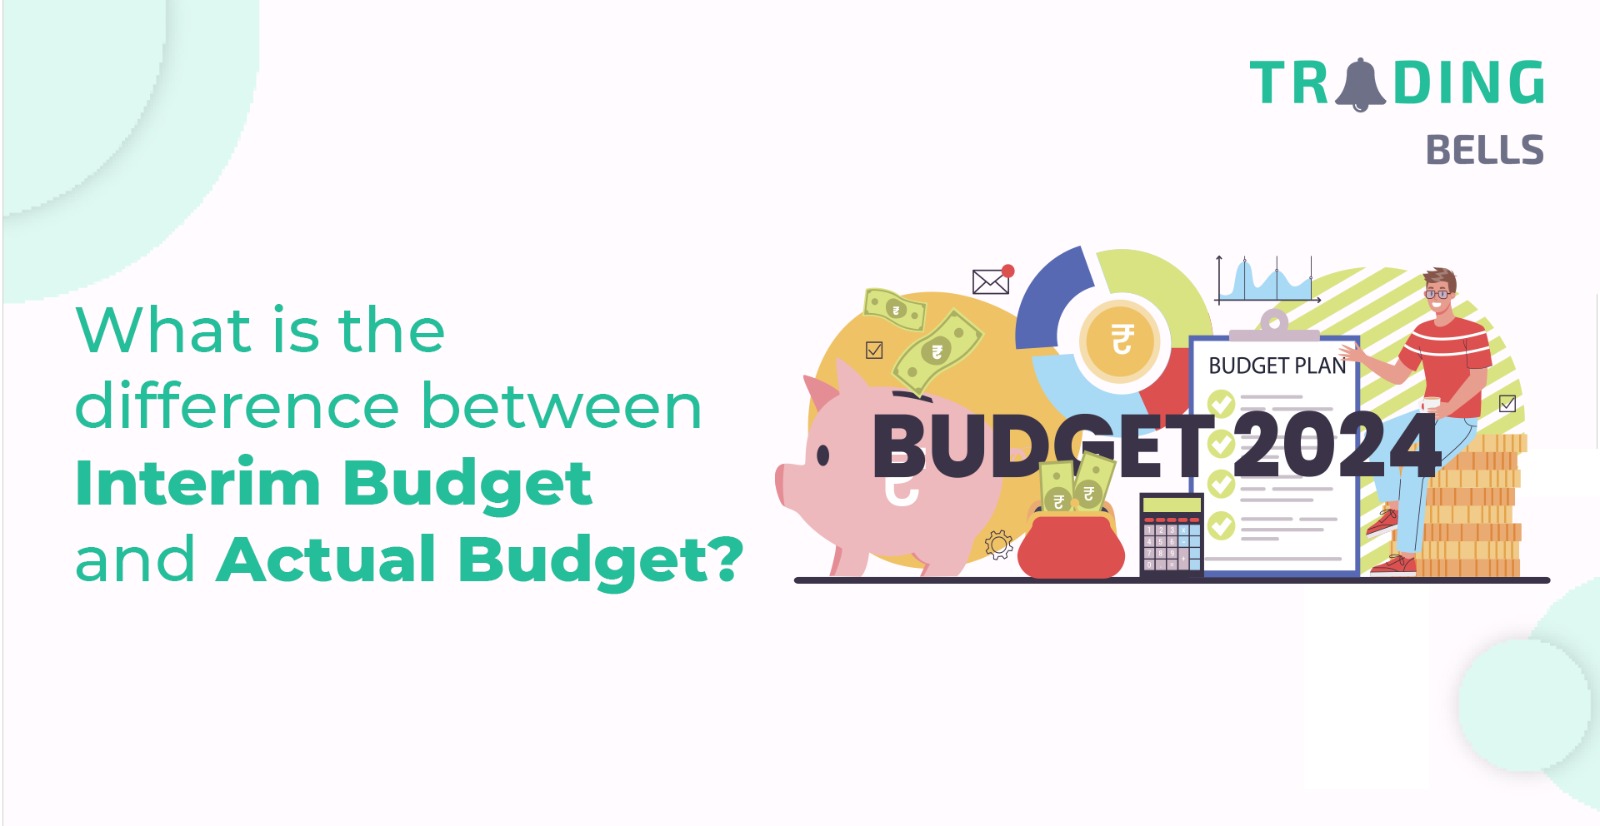 Difference between an Interim Budget and an Actual Budget